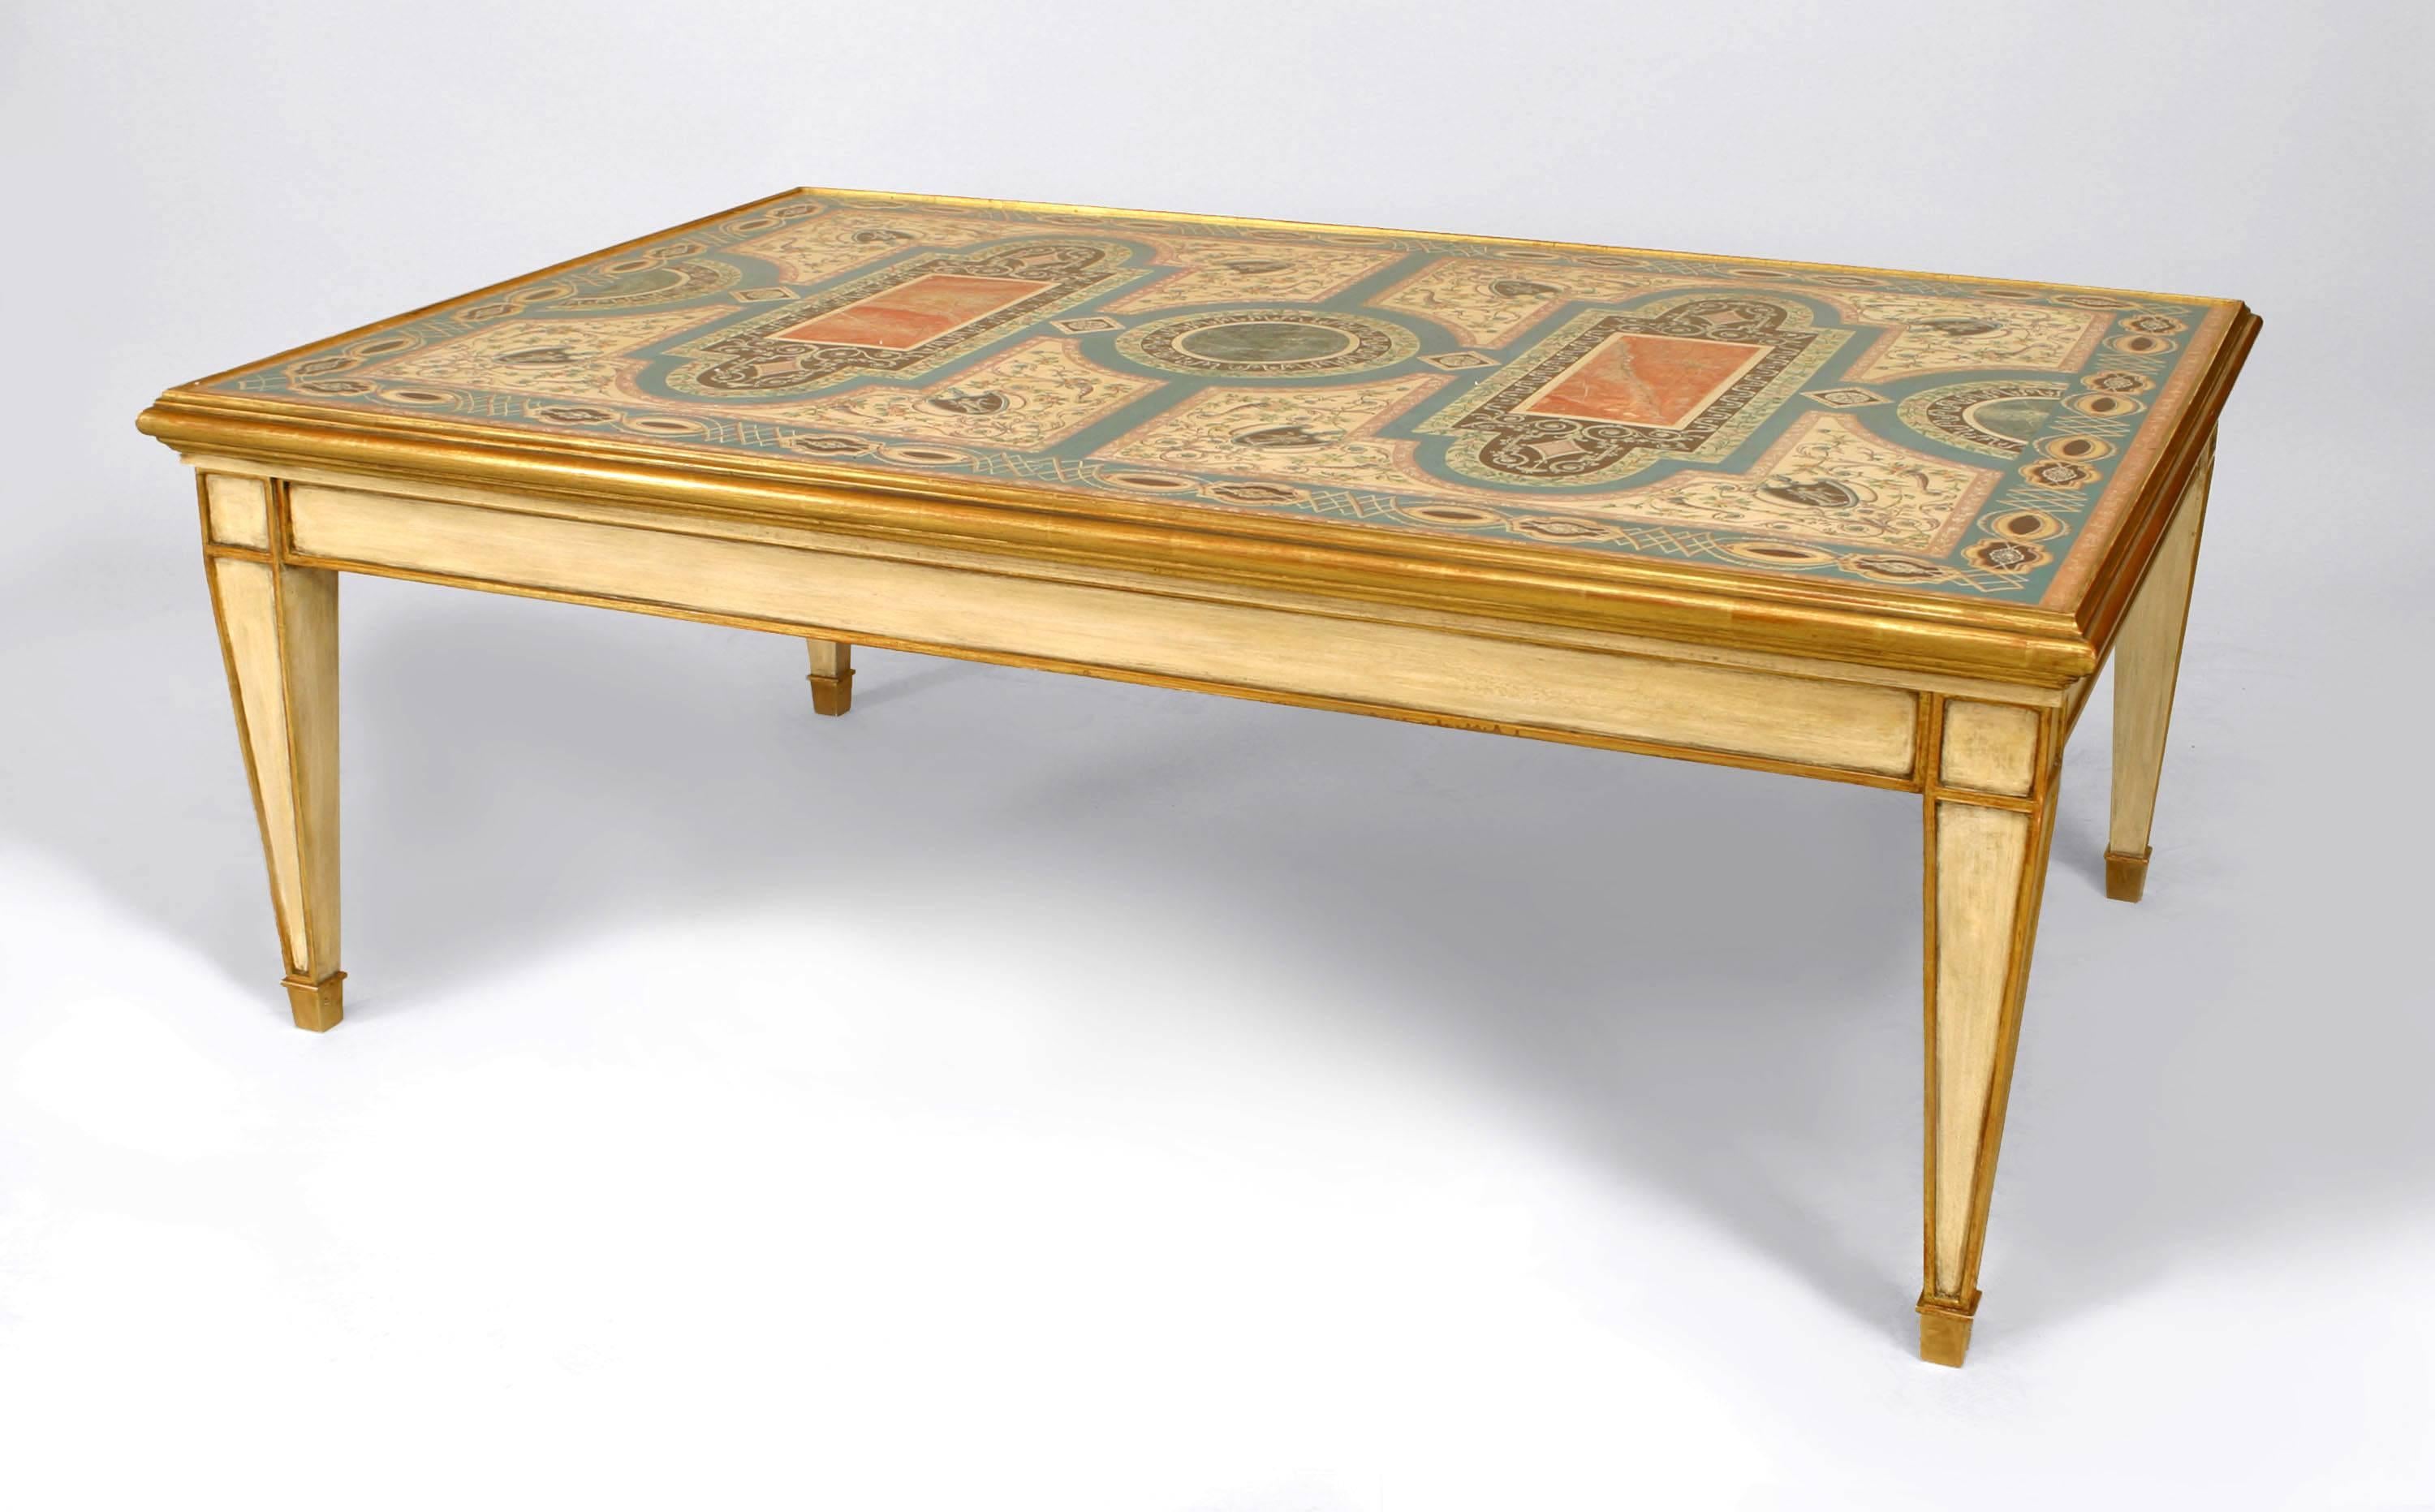 Italian Venetian-style rectangular coffee table with a Pair of 18th Century decoratively painted panels inset in a modern off-white and gilt trimmed base with tapered square legs.
